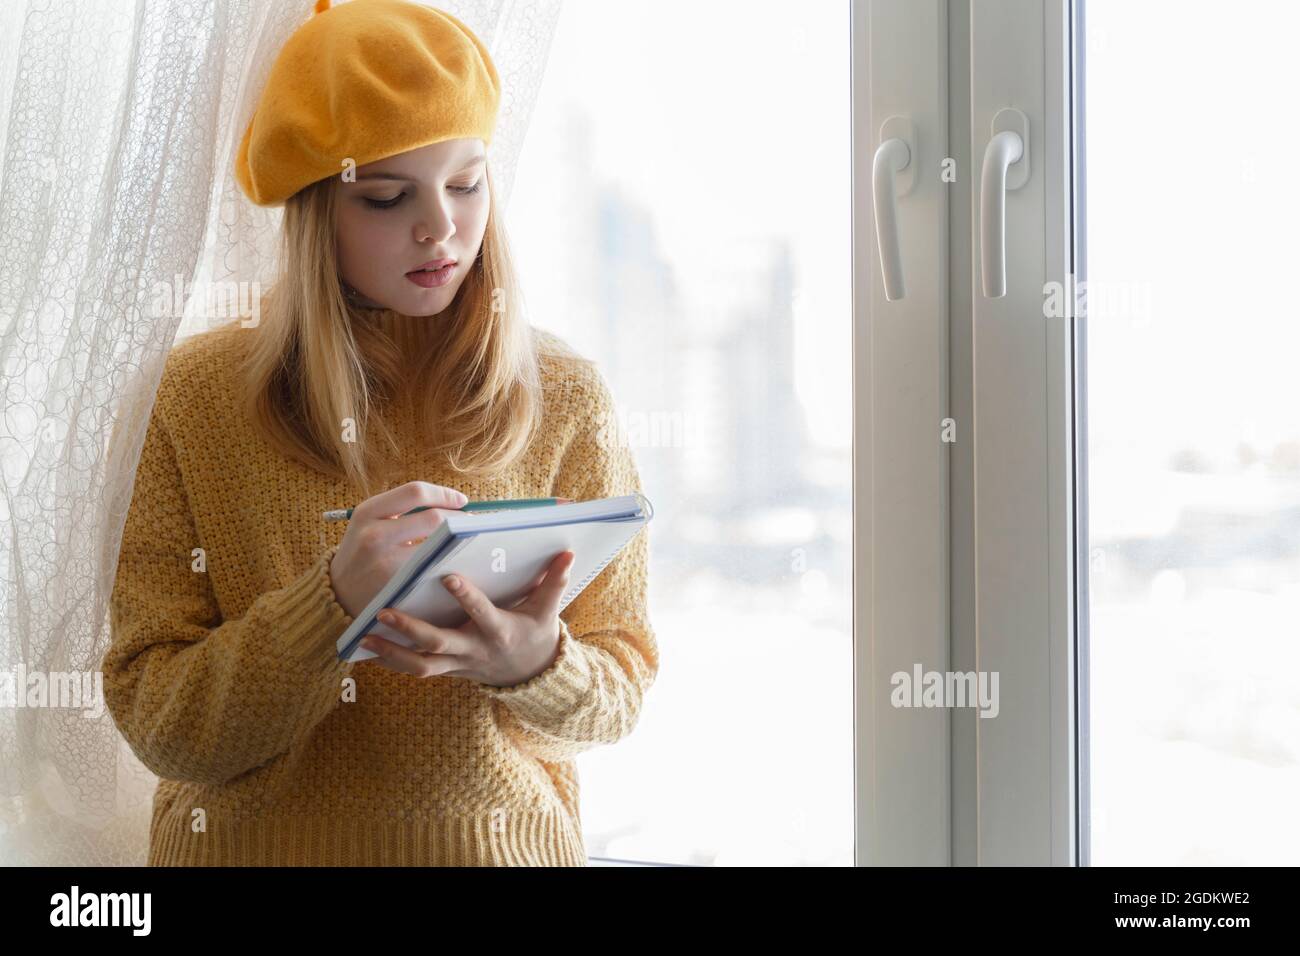 a young girl artist makes sketches in her sketchbook sitting by the window in a yellow beret Stock Photo